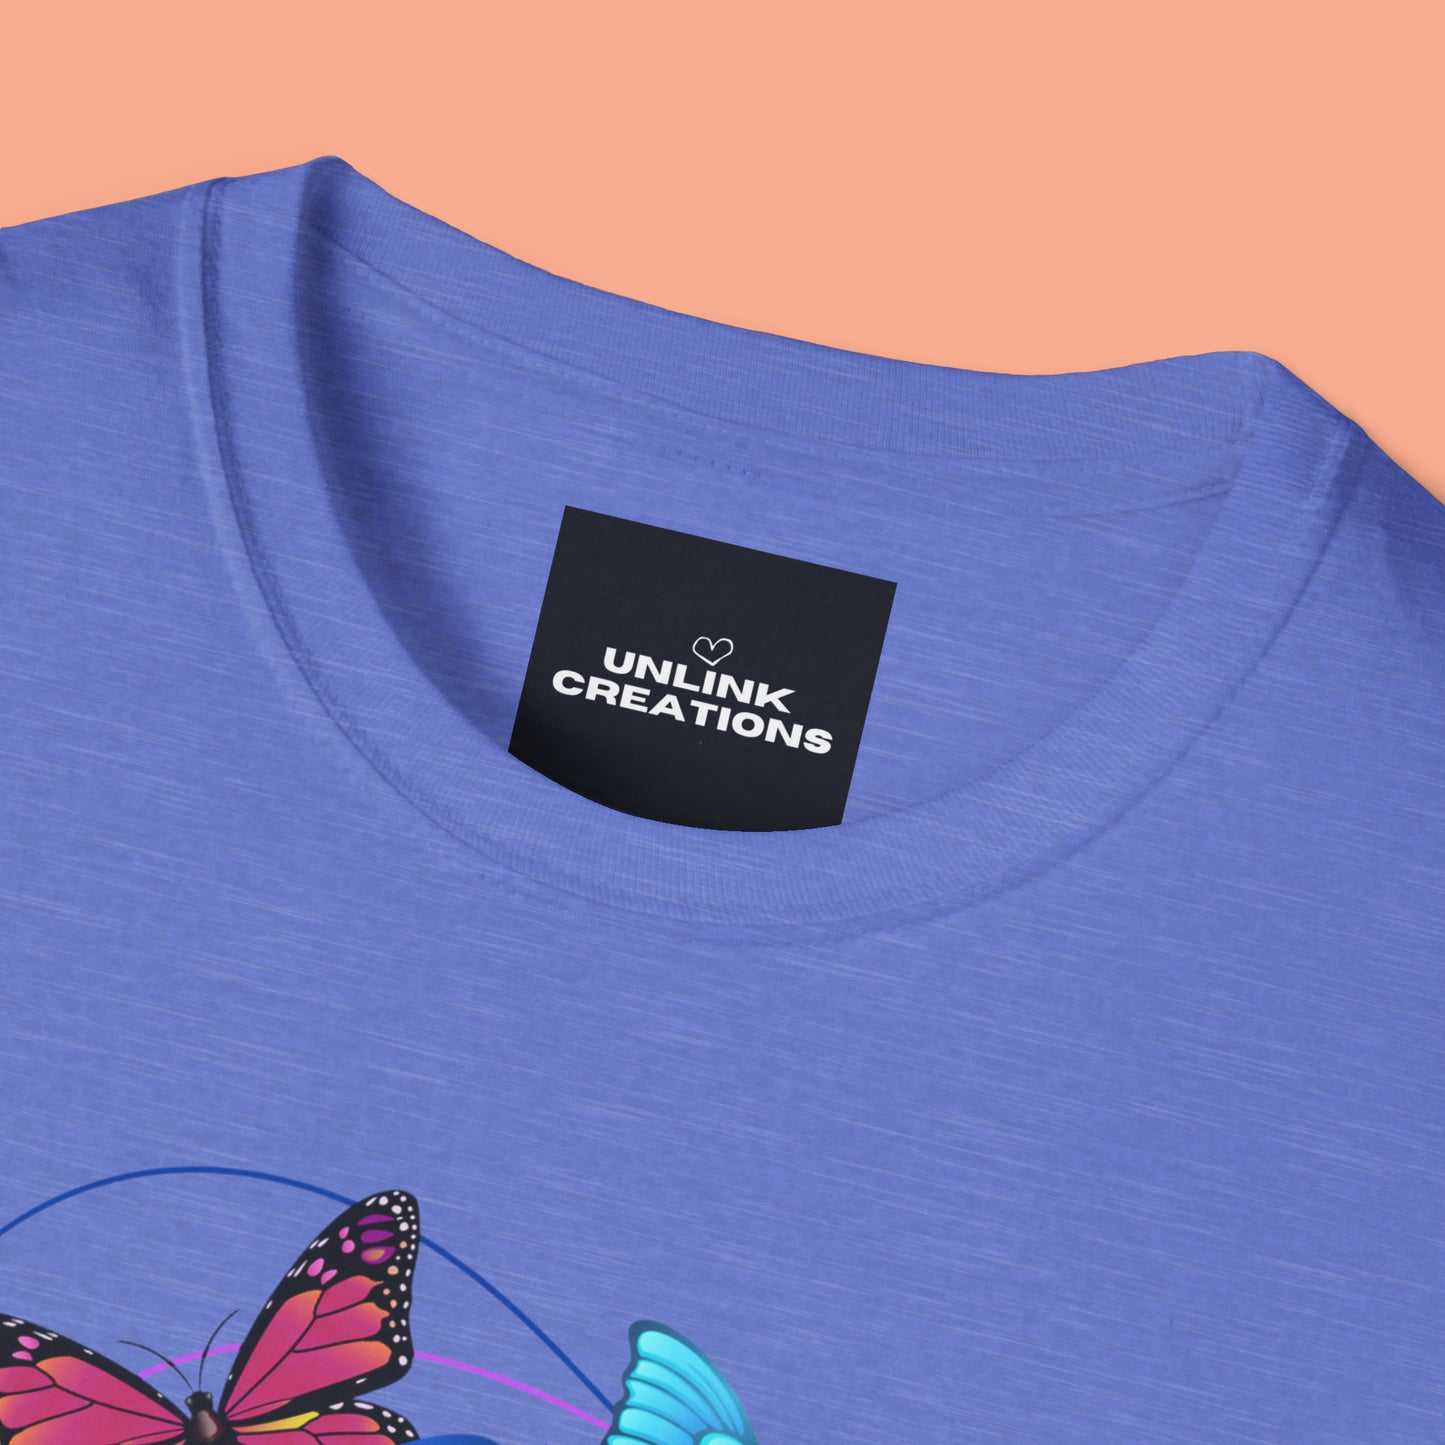 Butterflies are beautiful and fascinating! Over 17,500 recorded butterfly species. This Unisex Softstyle T-Shirt is for that butterfly lover.